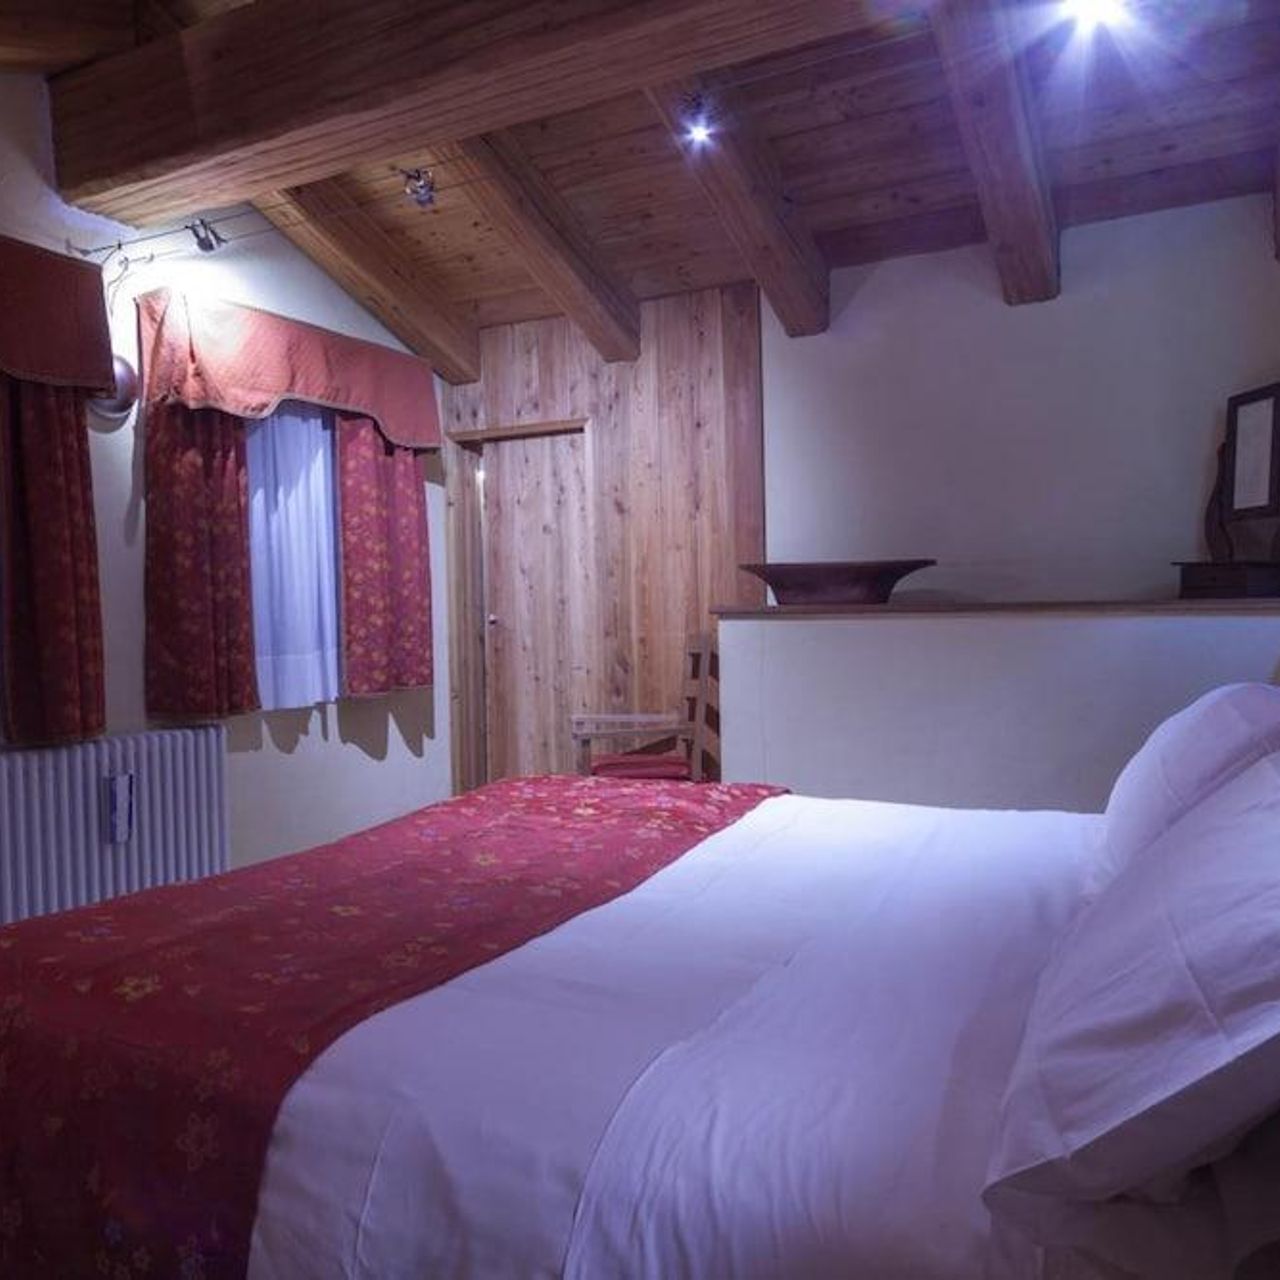 Hotel Maison Saint Jean - Courmayeur - Great prices at HOTEL INFO